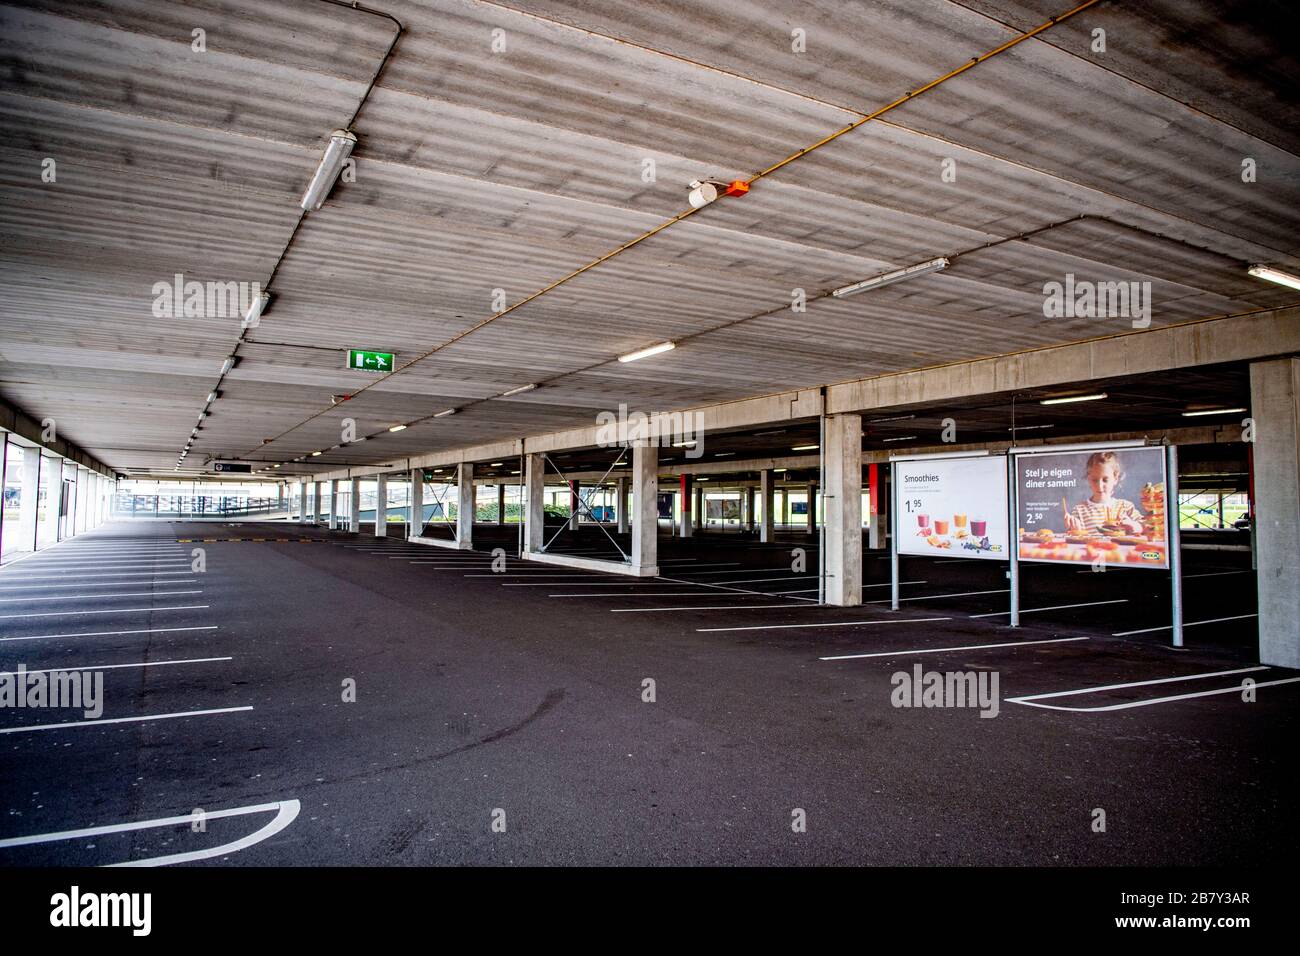 an empty parking lot at an ikea store due to lack of customers as the store is closed ikea is closing all its stores in the netherlands as the covid 19 coronavirus is spreading